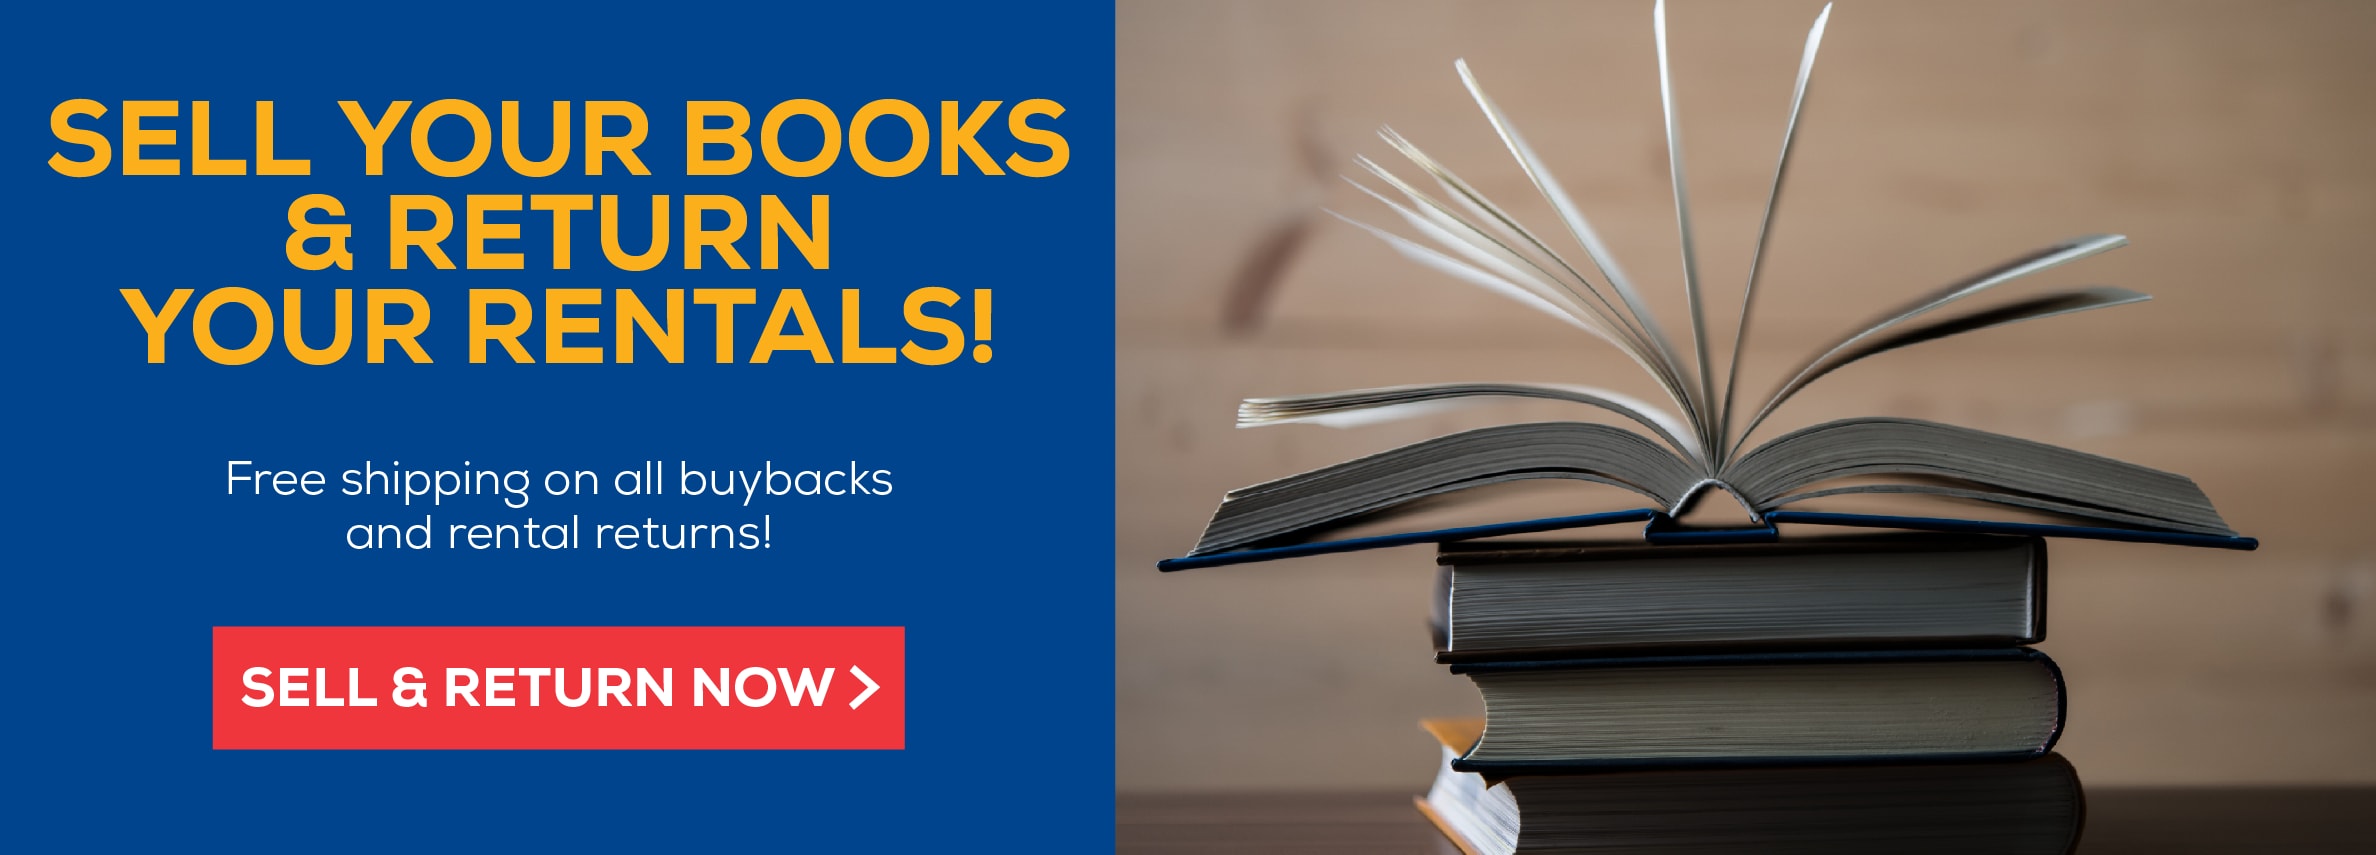 Sell your books and return your rentals! free shipping on all buybacks and rentals returns! sell and return now